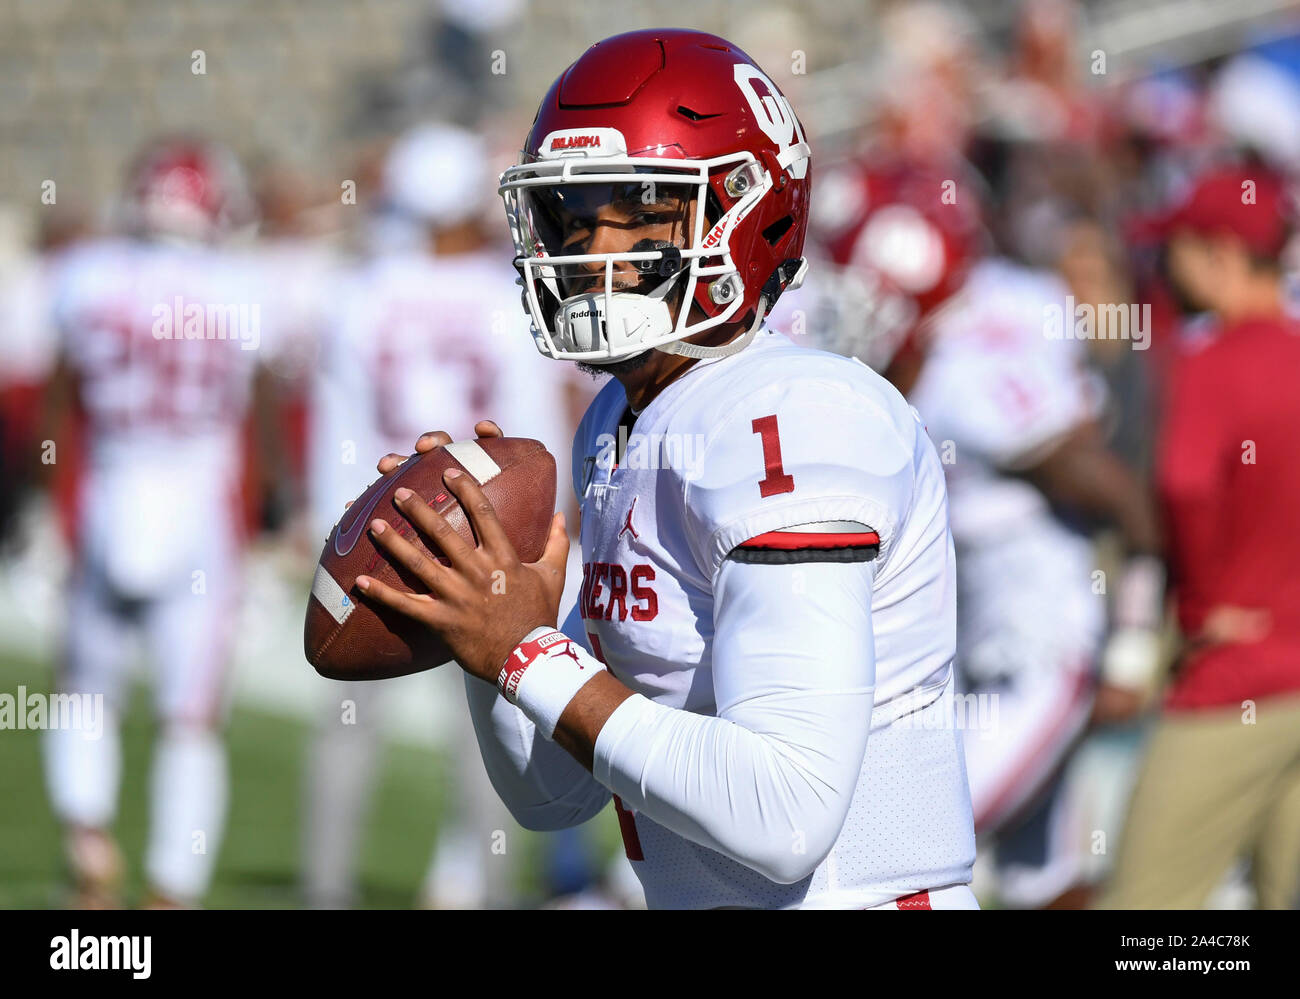 Oct 12, 2019: Oklahoma Sooners quarterback Jalen Hurts #1 passed for 235 yards and 3 touchdowns during the NCAA Red River Rivalry game between the University of Oklahoma Sooners and the University of Texas Longhorns at the Cotton Bowl Stadium at Fair Park in Dallas, TX Oklahoma defeated 34-27 Albert Pena/CSM Stock Photo